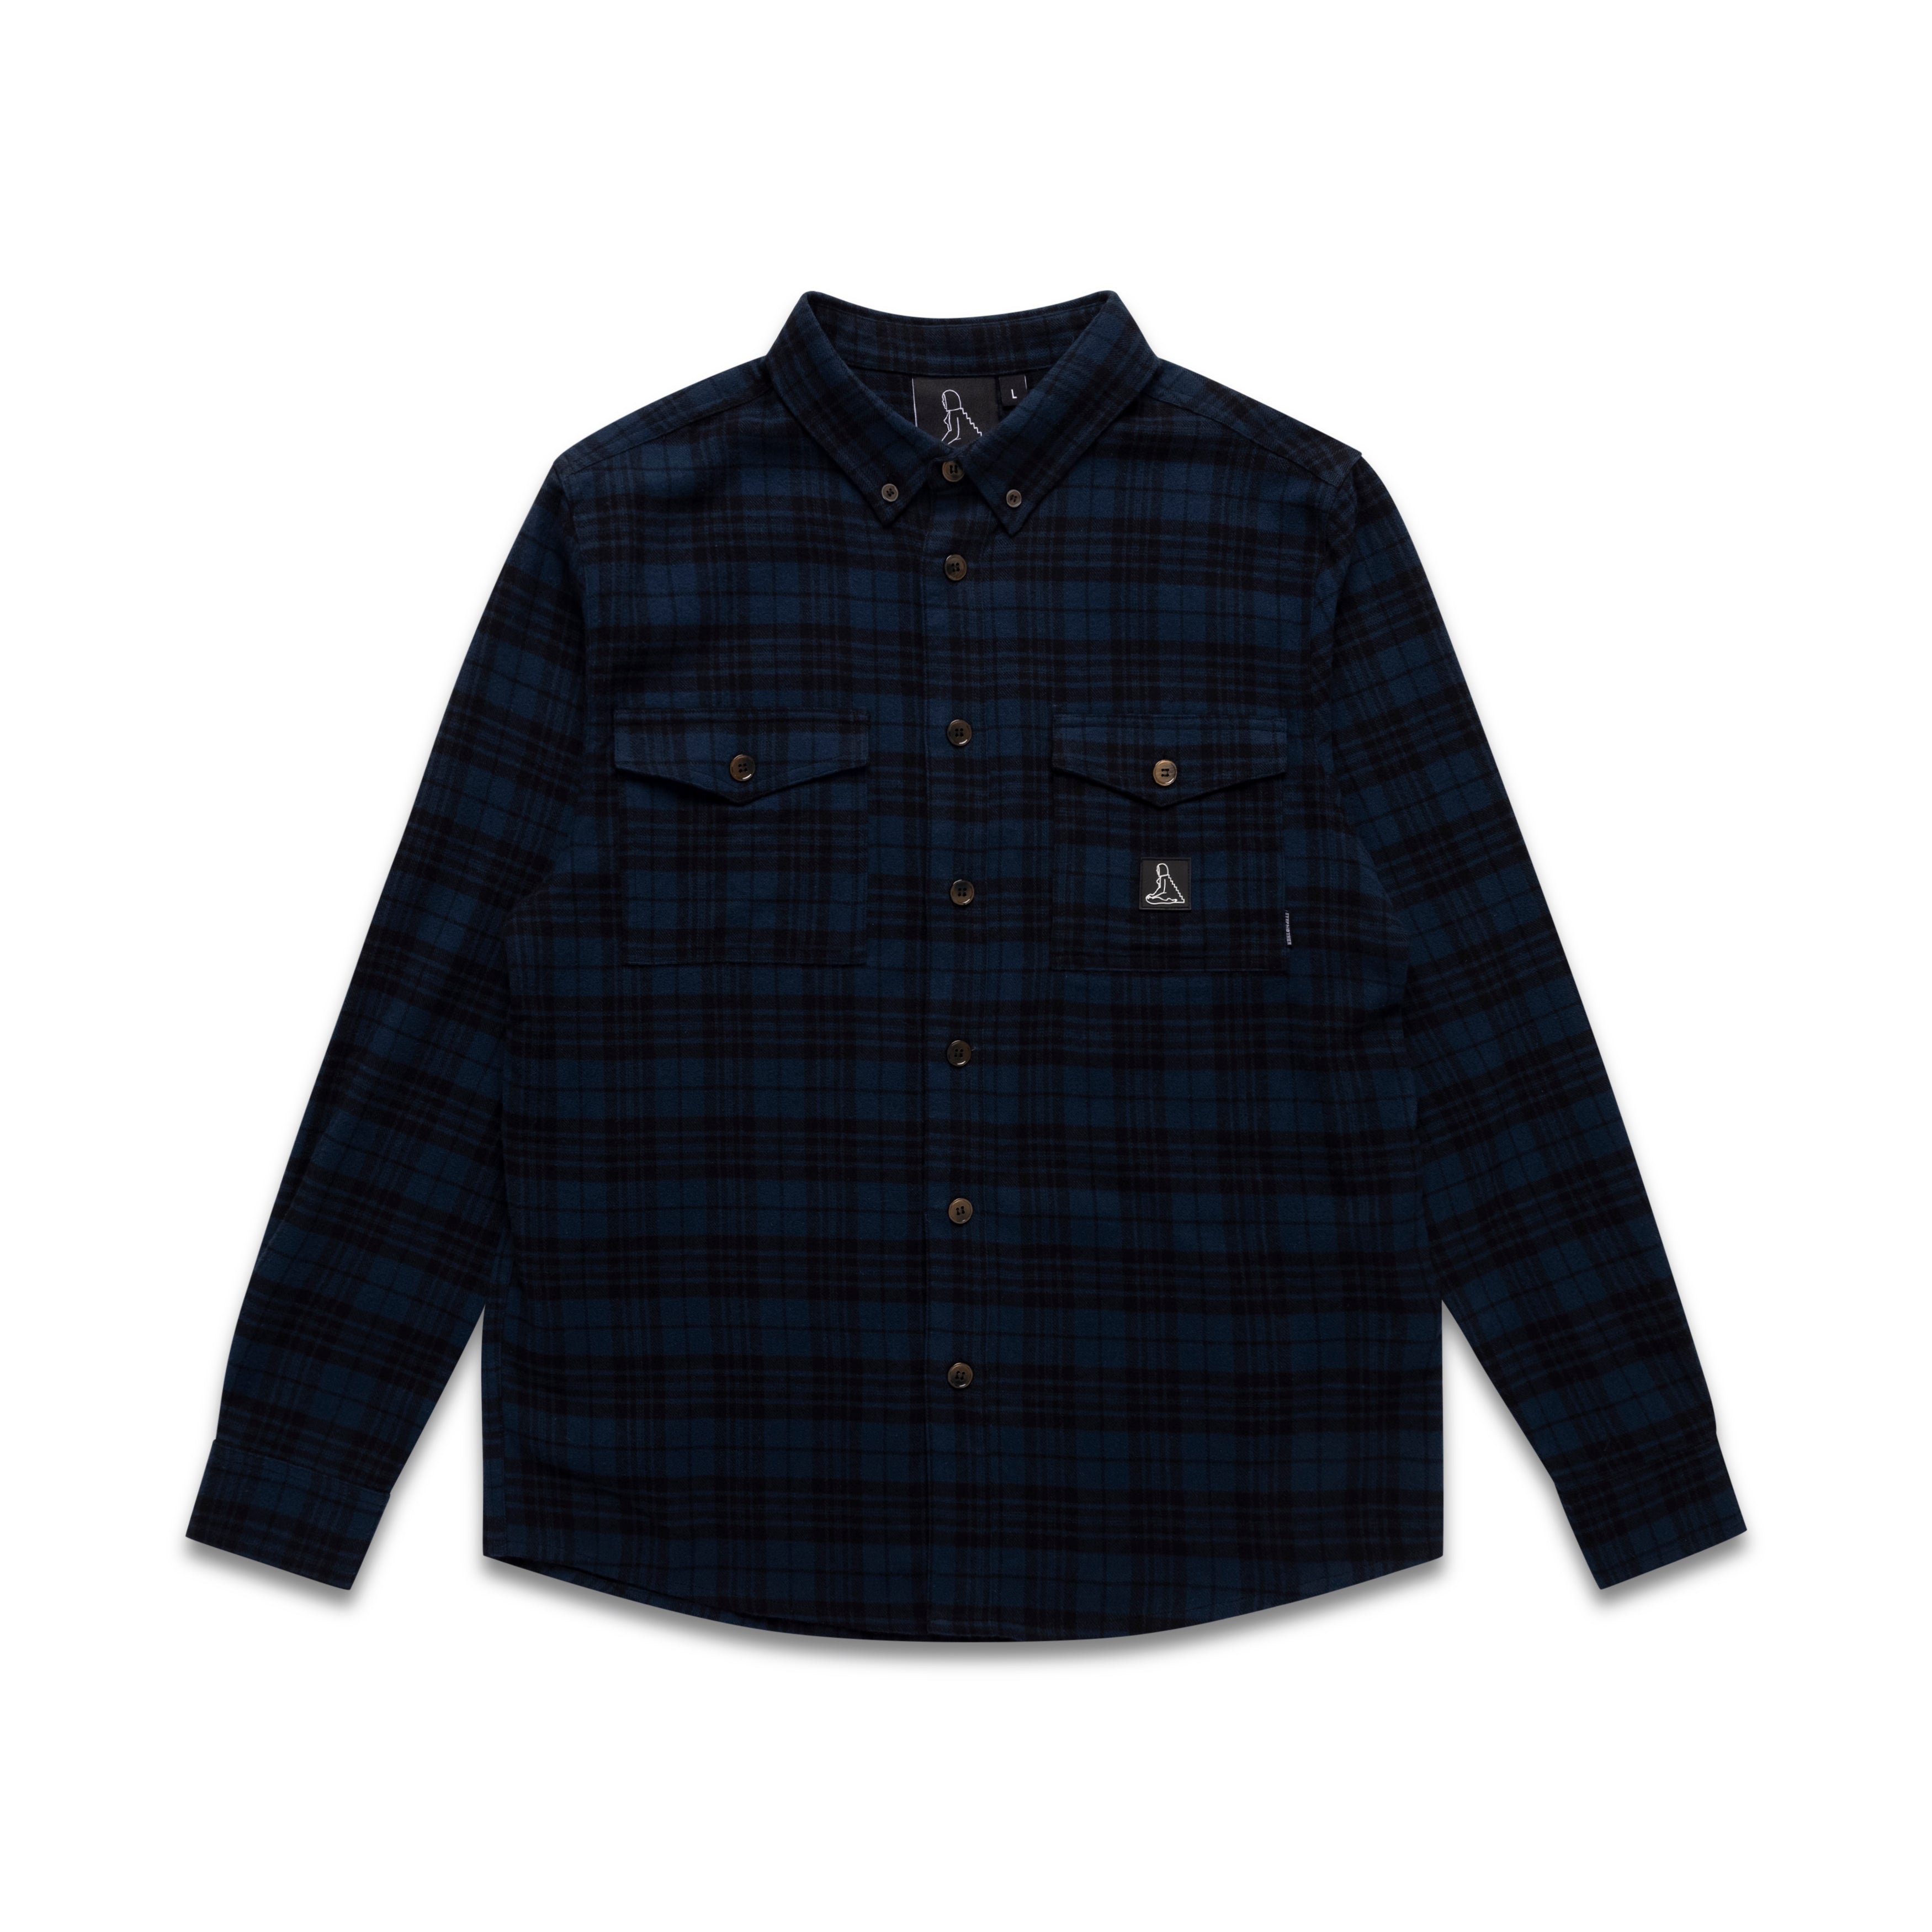 Leisure flannel check shirt - Navy